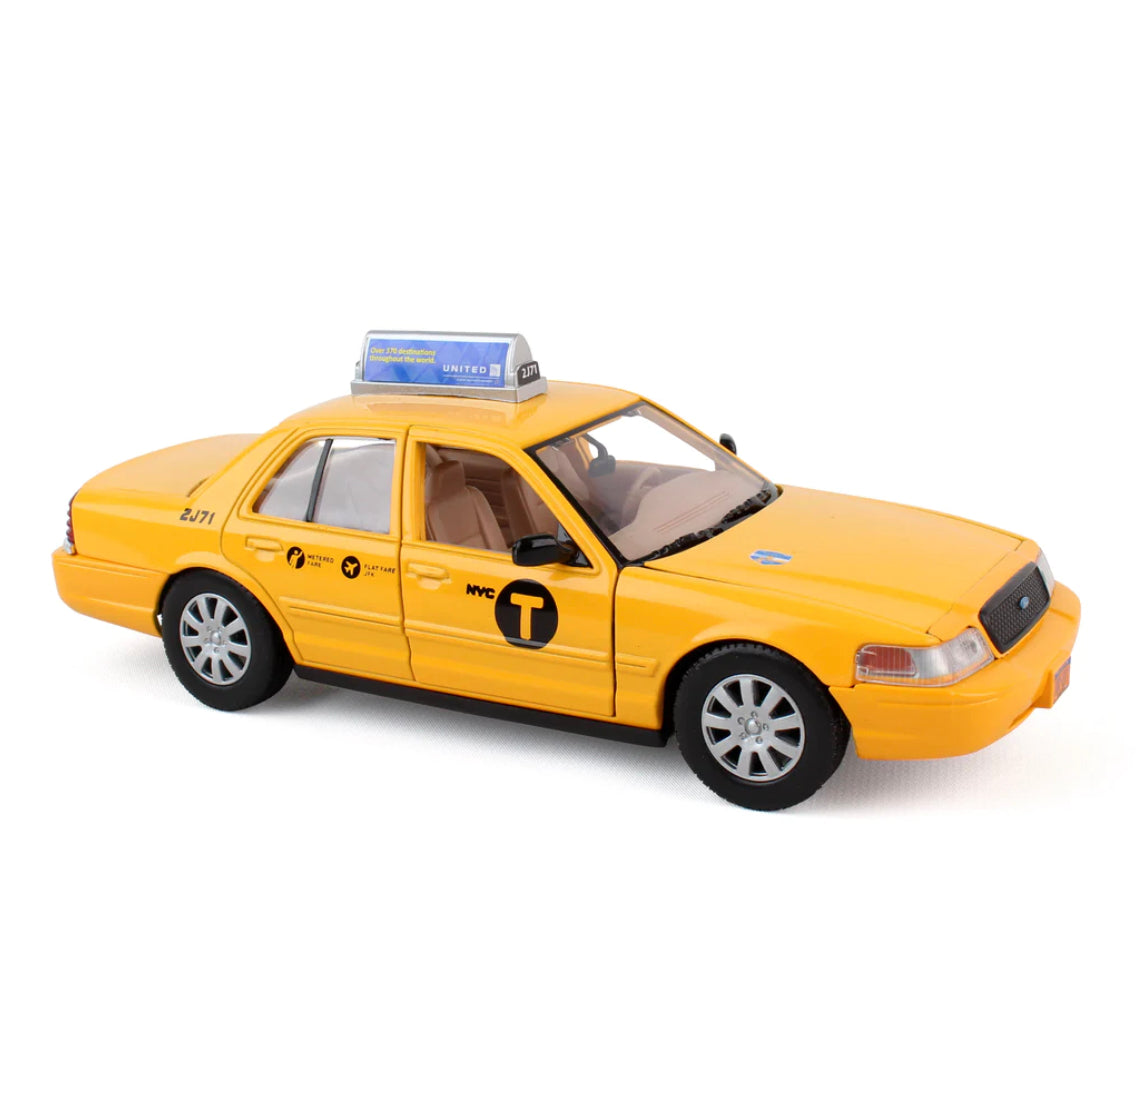 New York City Officially Licensed Crown Victoria Yellow Taxi – 9" x 3"